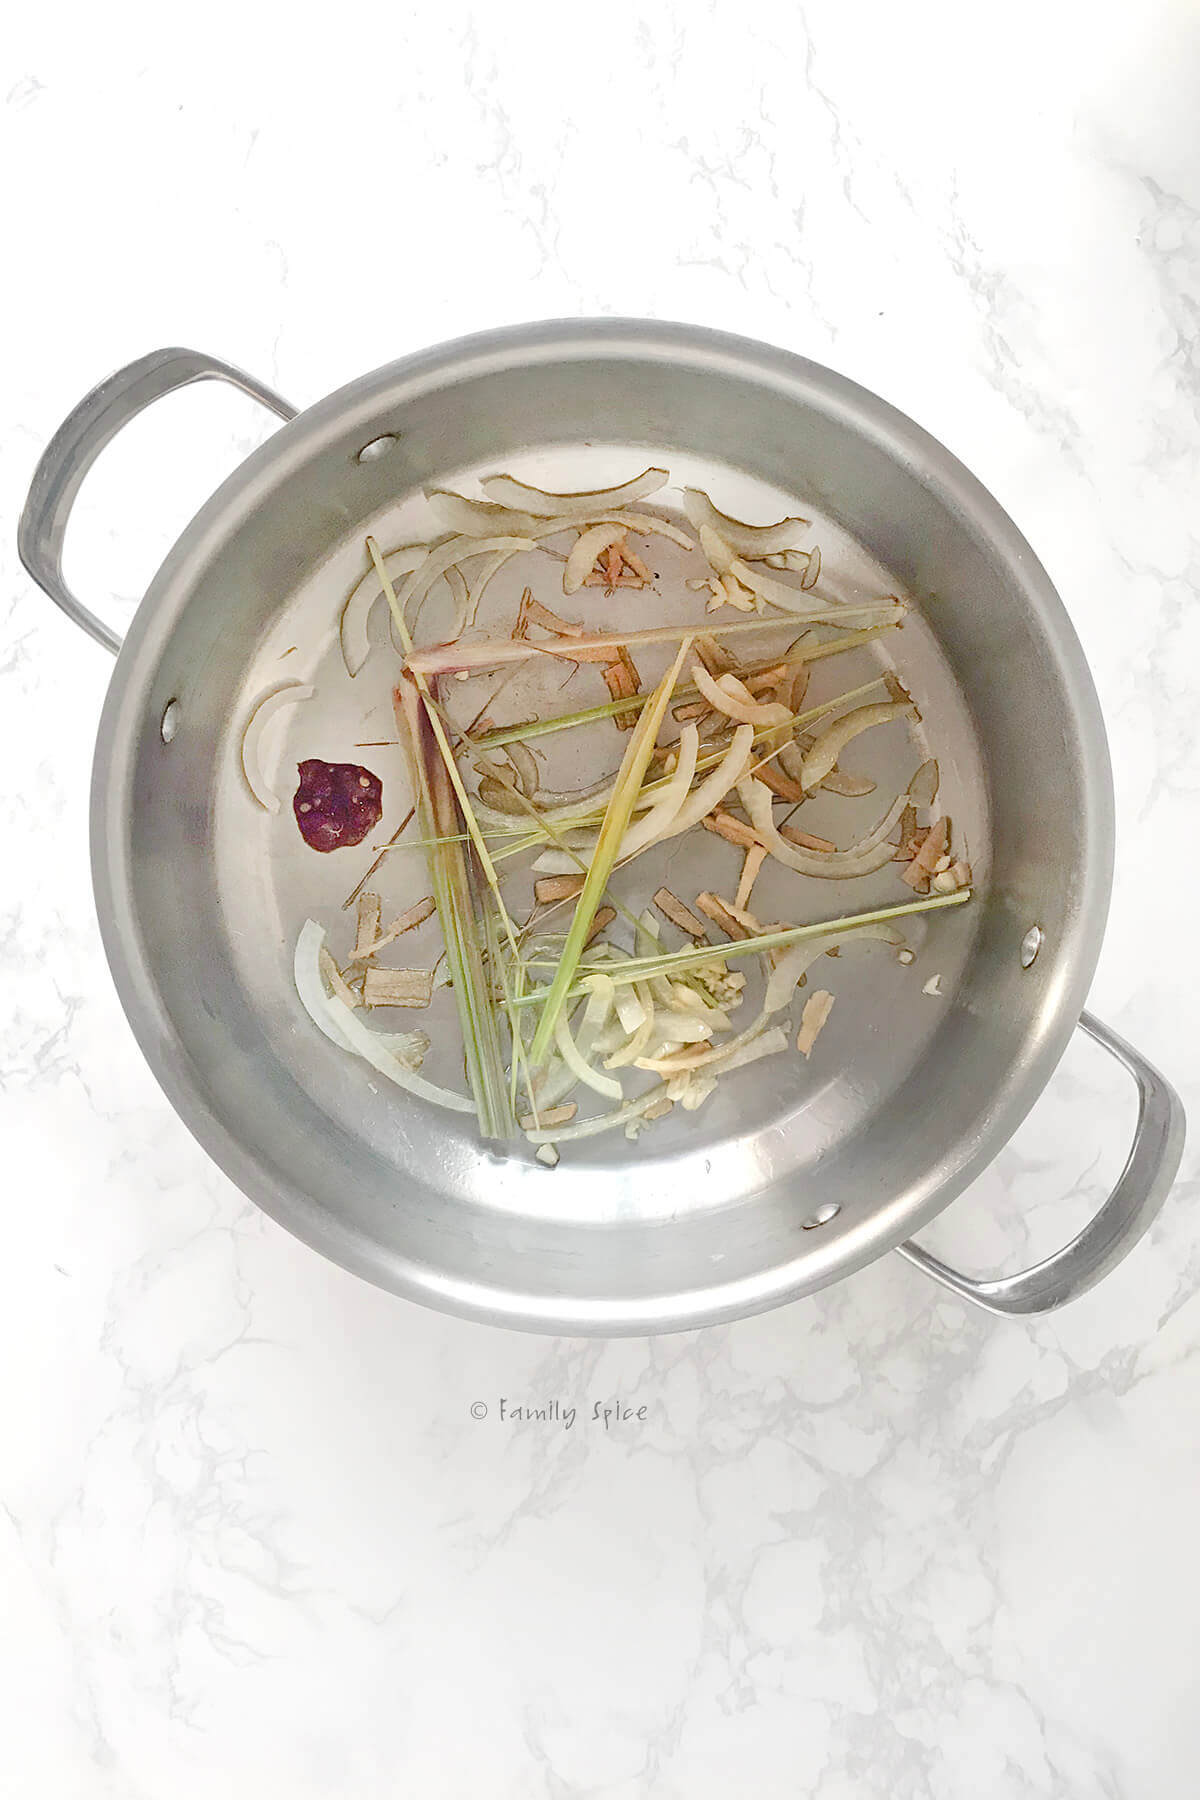 Top view of a stainless pot with sauteed onions, lemongrass, garlic and chile paste